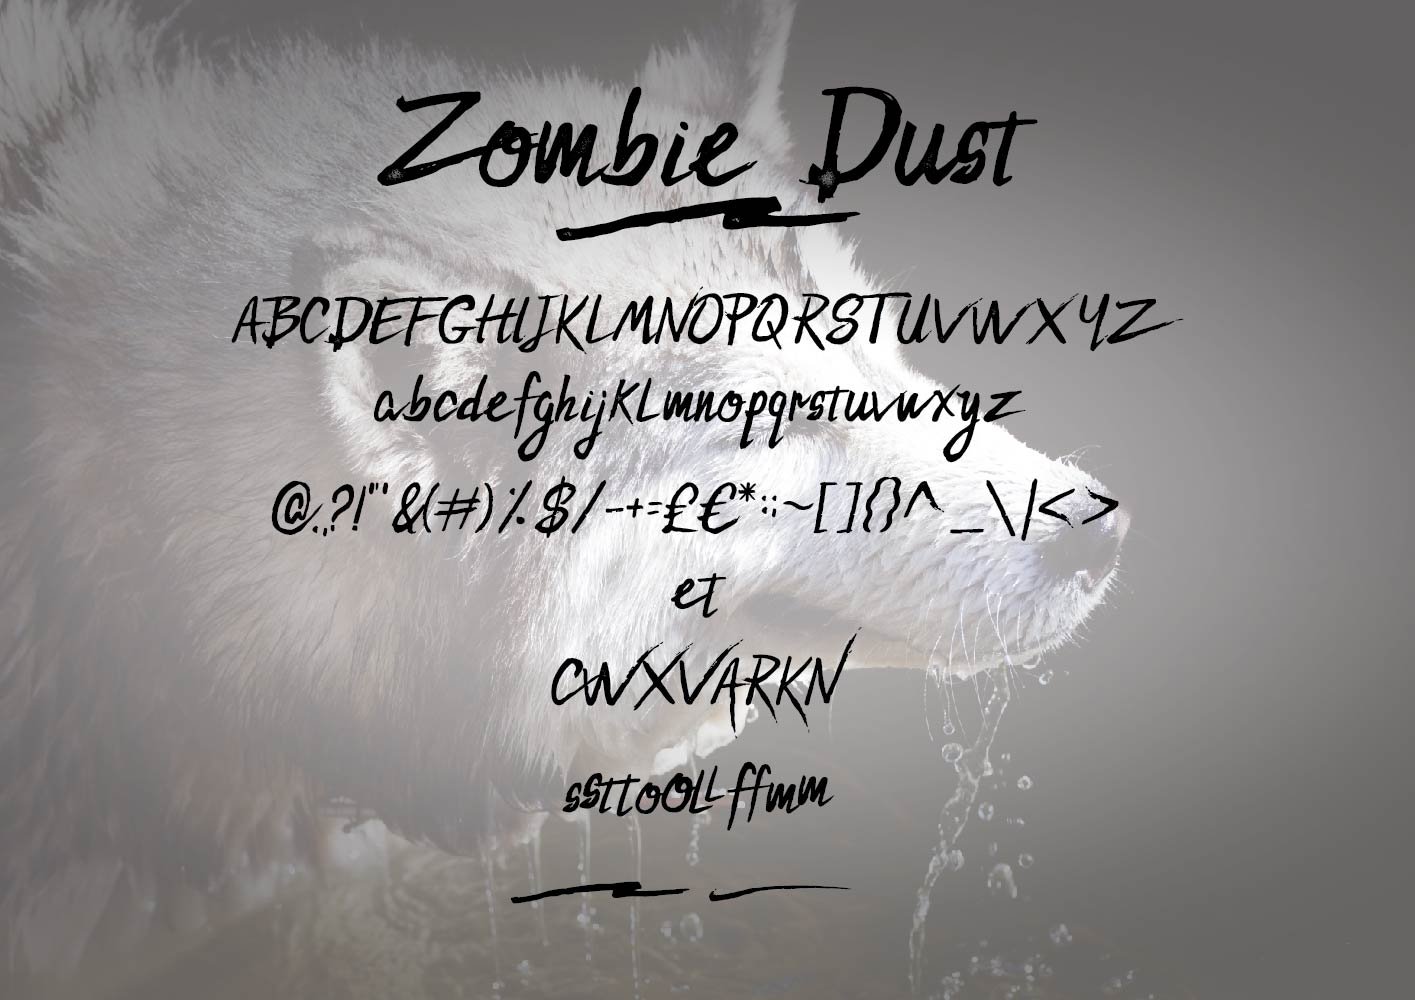 Zombie Dust preview image.